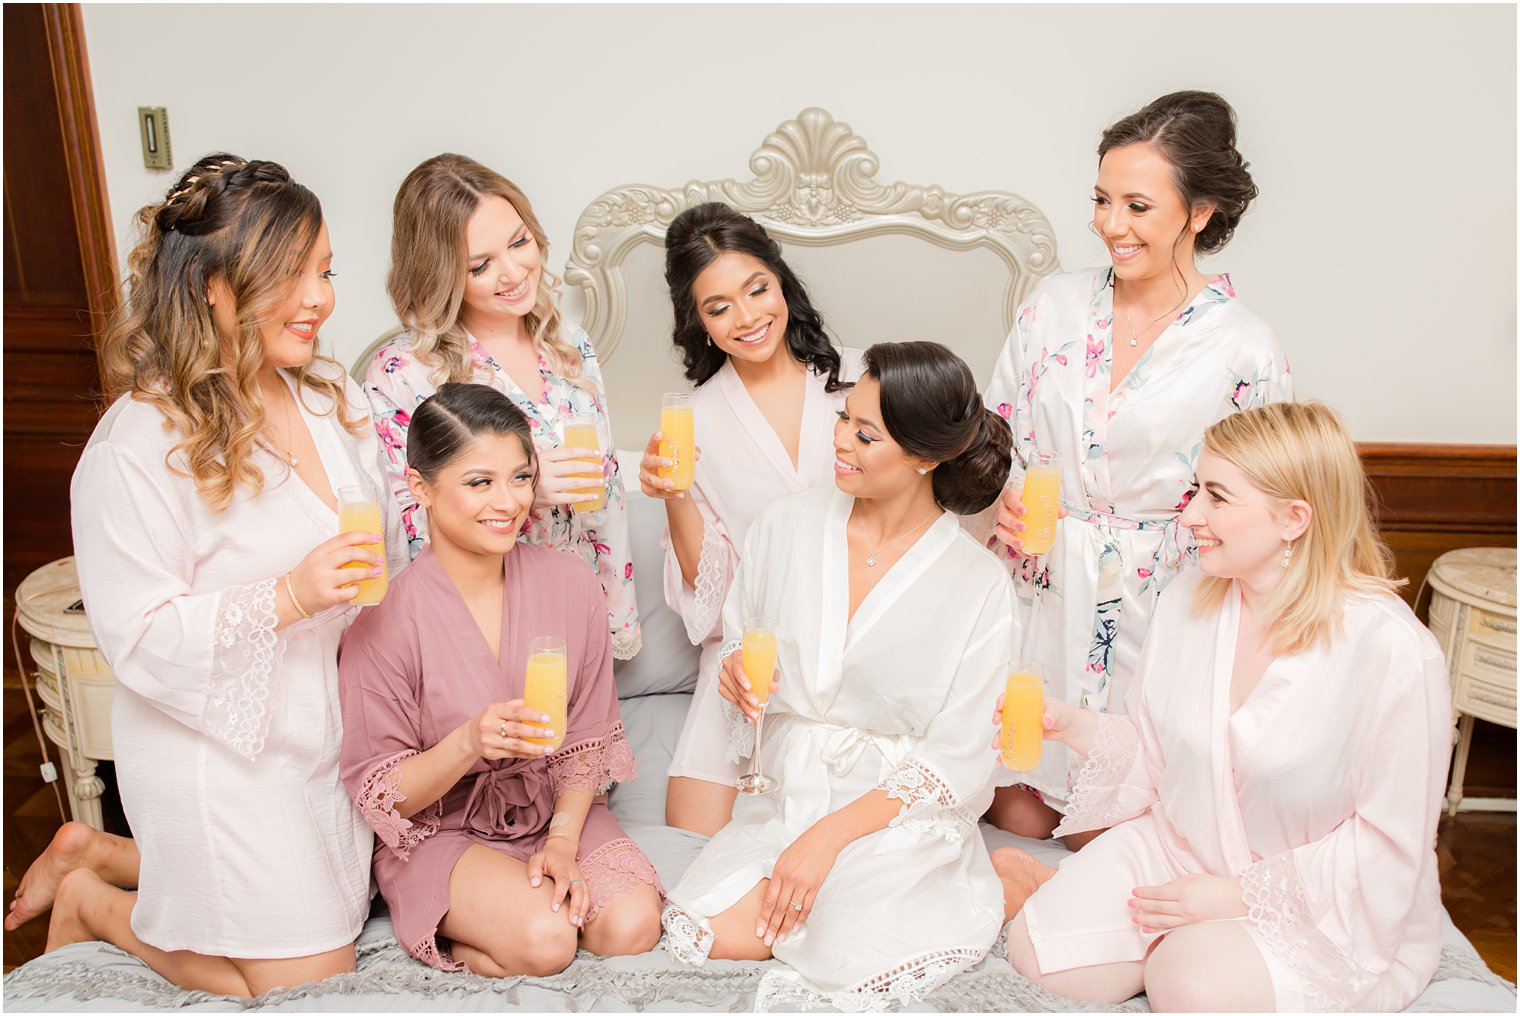 Bridesmaids drinking mimosas on bed